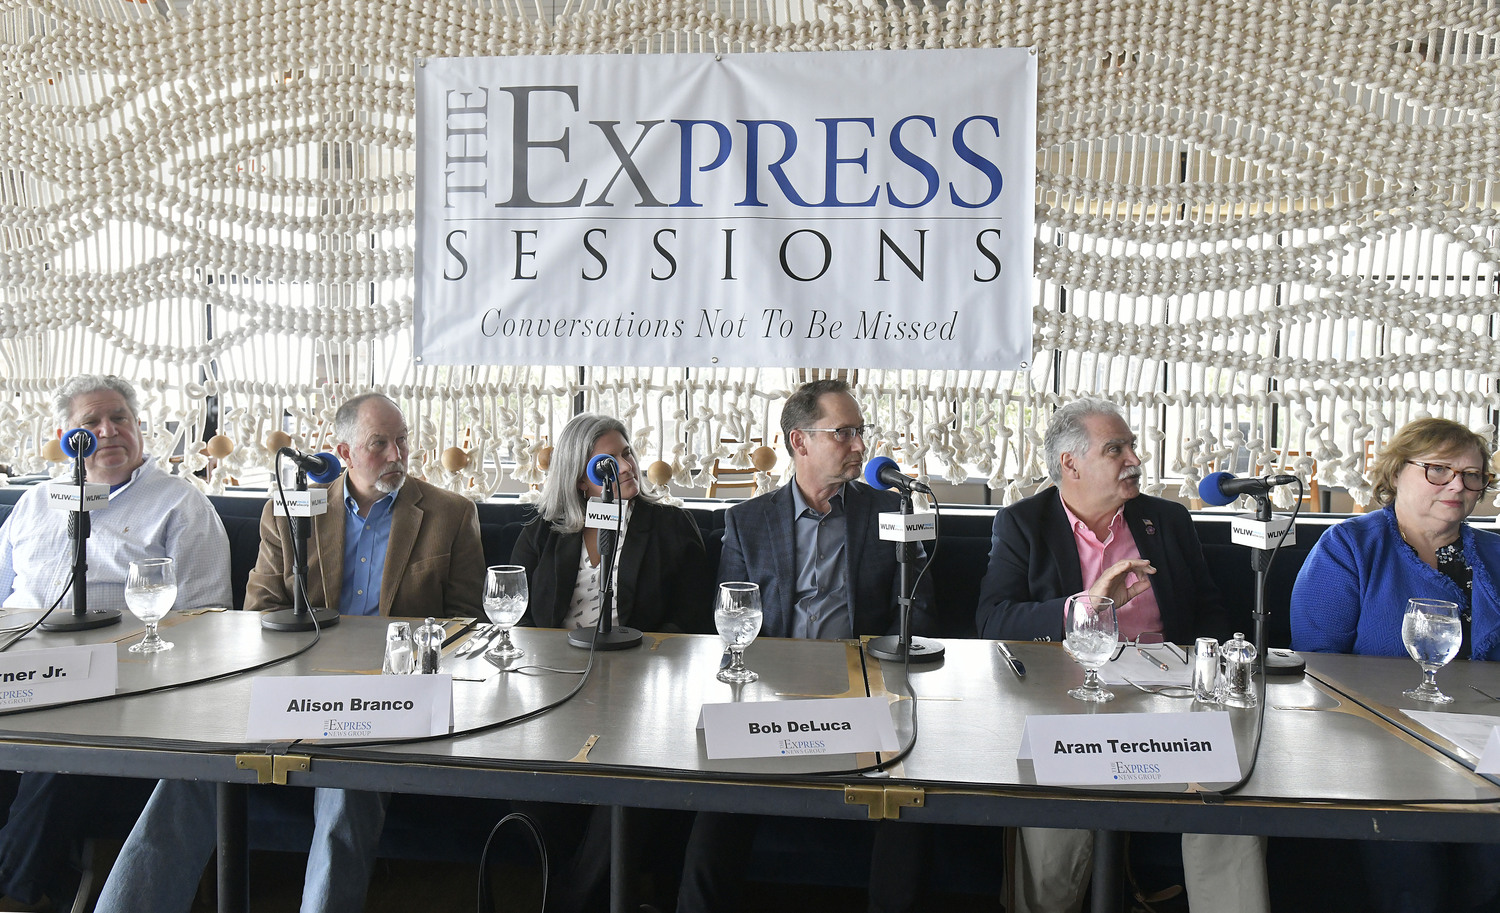 The panel at the Express Session on April 4, 